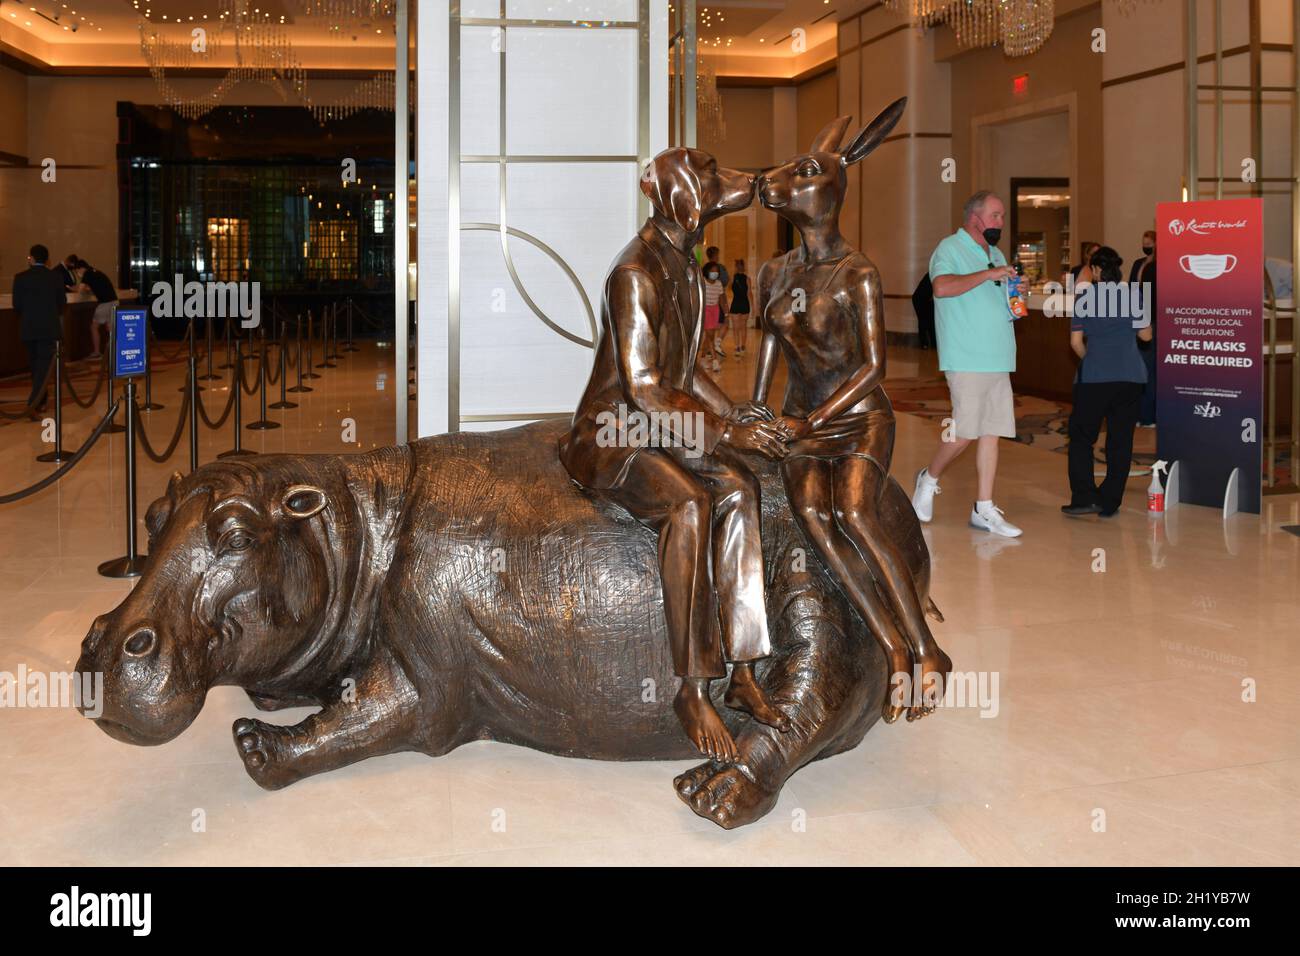 Nevada USA September 5, 2021 Public sculpture dedicated to endangered species located in the lobby of the Resorts World Las Vegas hotel Stock Photo